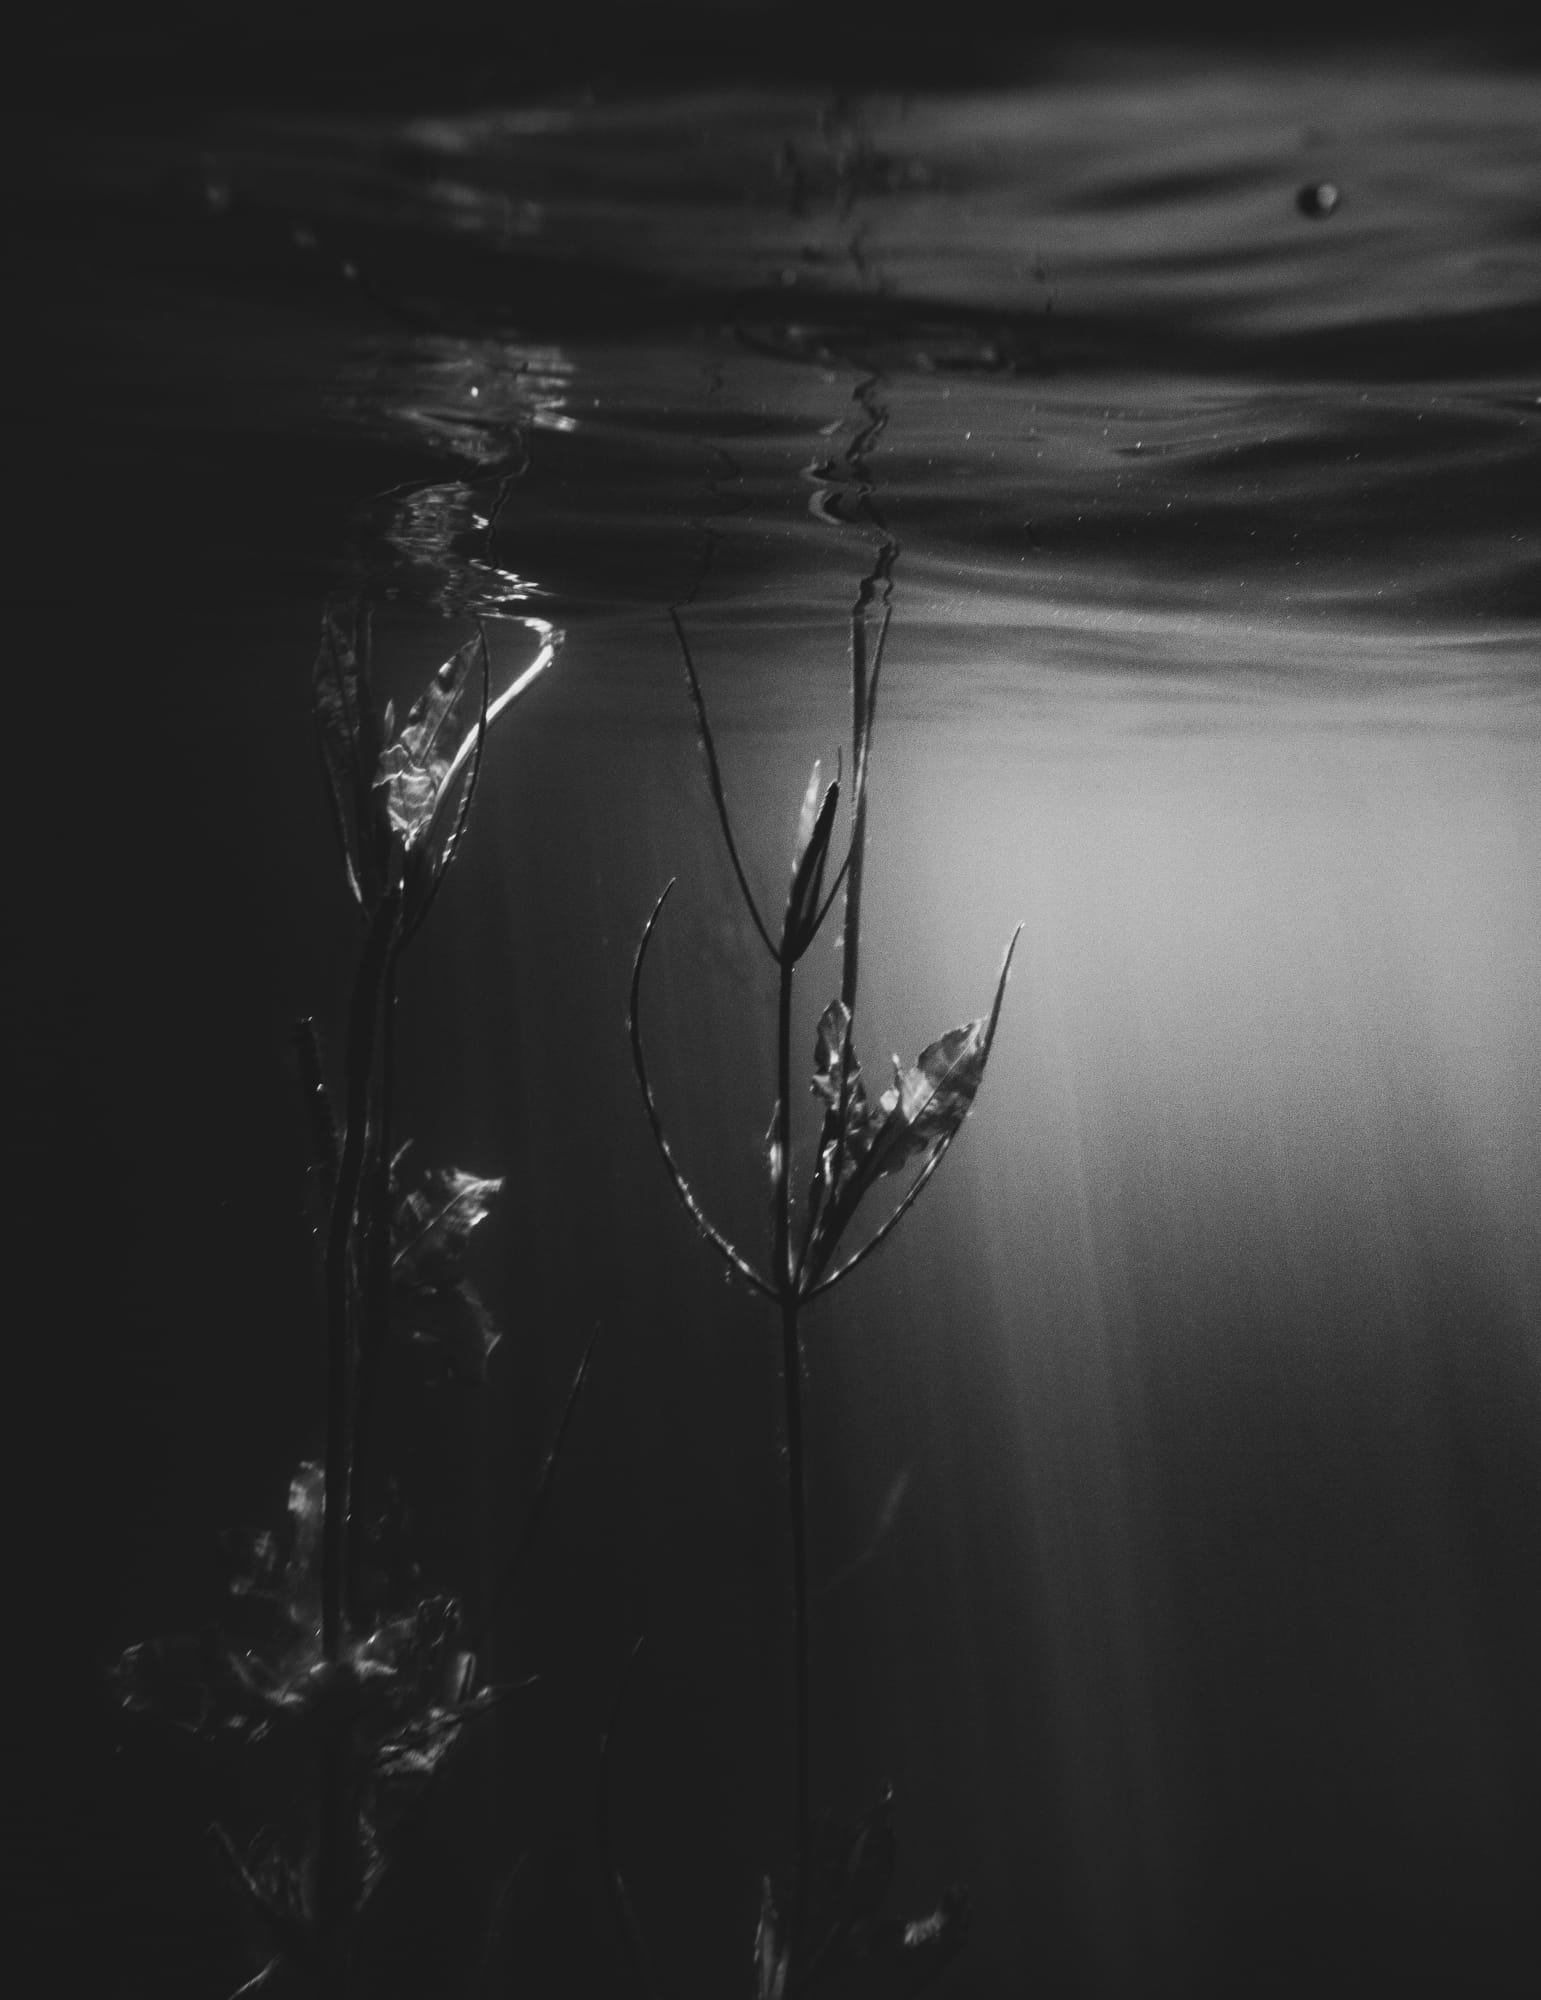 UNDER THE SURFACE